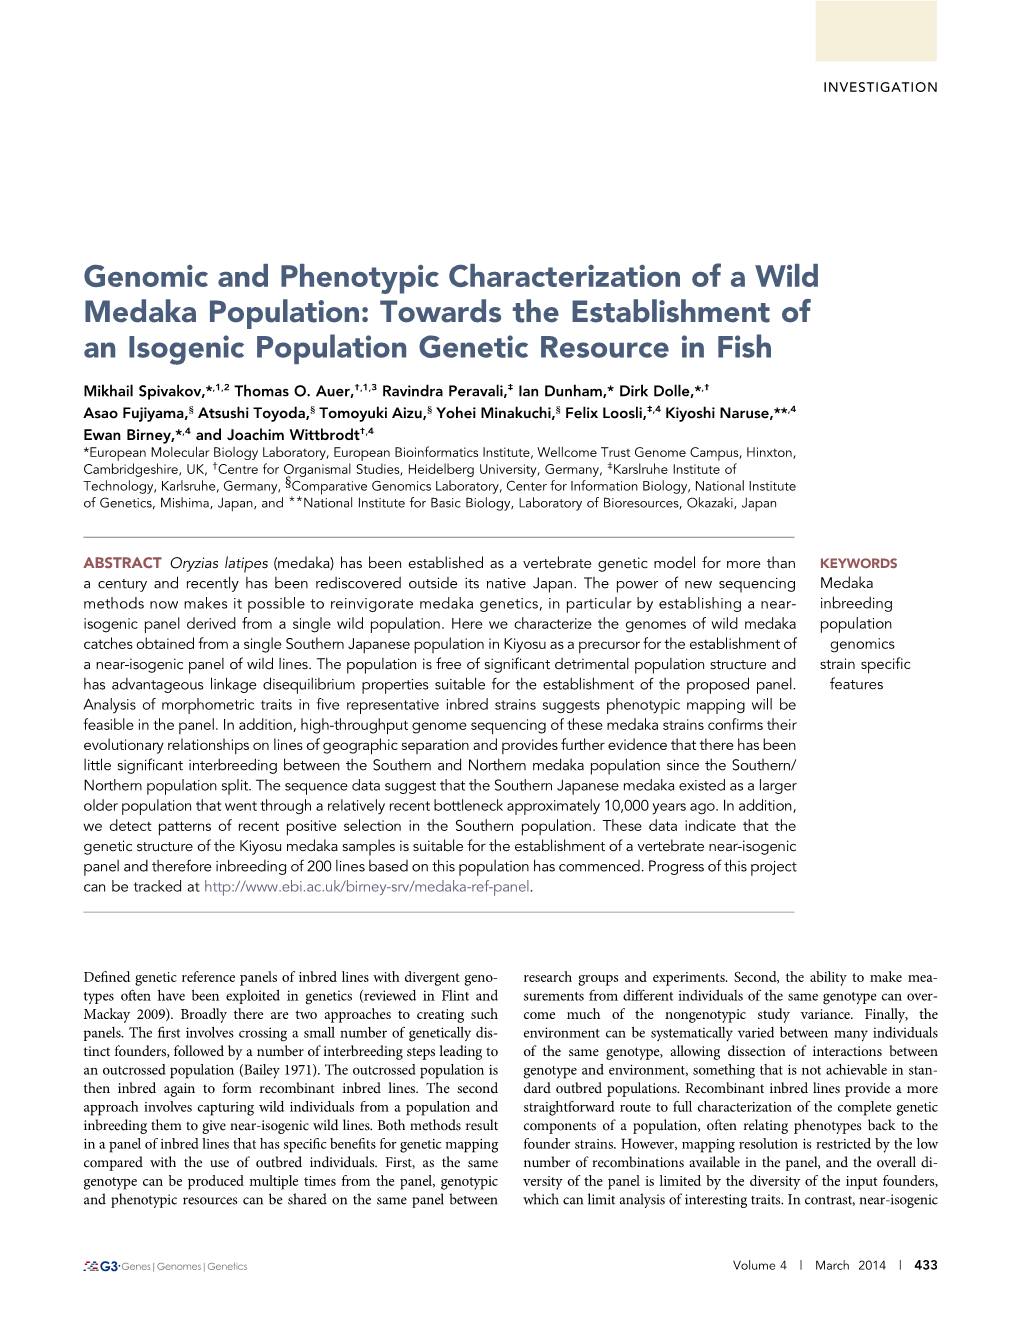 Genomic and Phenotypic Characterization of a Wild Medaka Population: Towards the Establishment of an Isogenic Population Genetic Resource in Fish